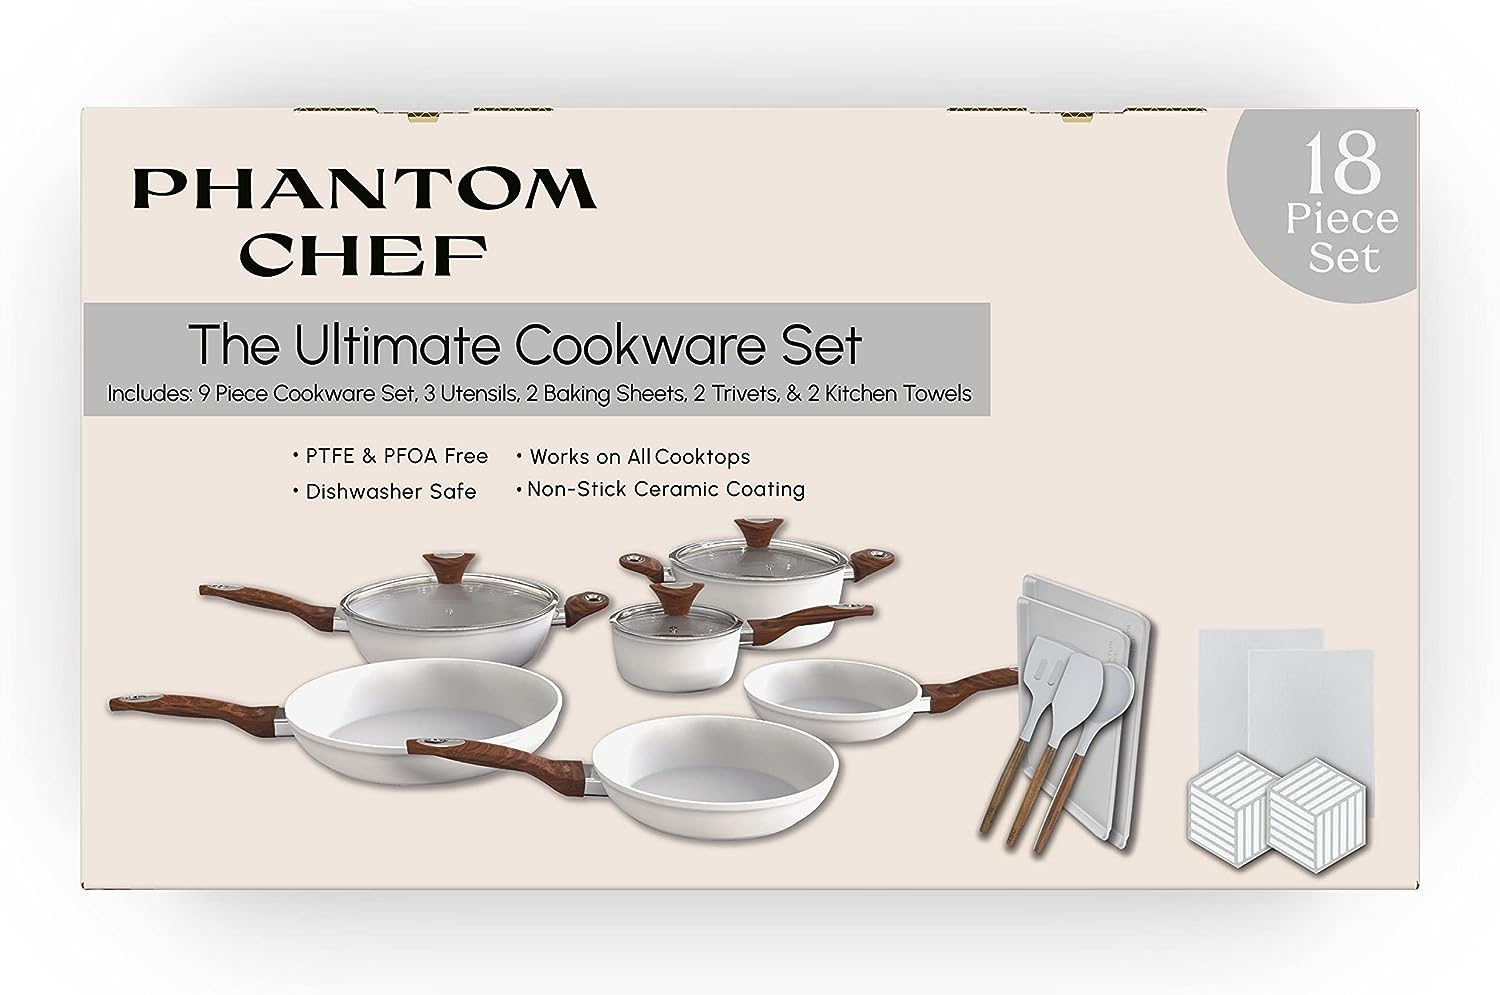 PHANTOM CHEF 18-Piece Cookware Set | Non-Stick Ceramic Coating | Oven  Dishwasher Safe | PFOA-Free | Aluminum Pots  Pans Set with Lids | Stay-Cool Handles | Induction Stovetop Compatible (Beige)